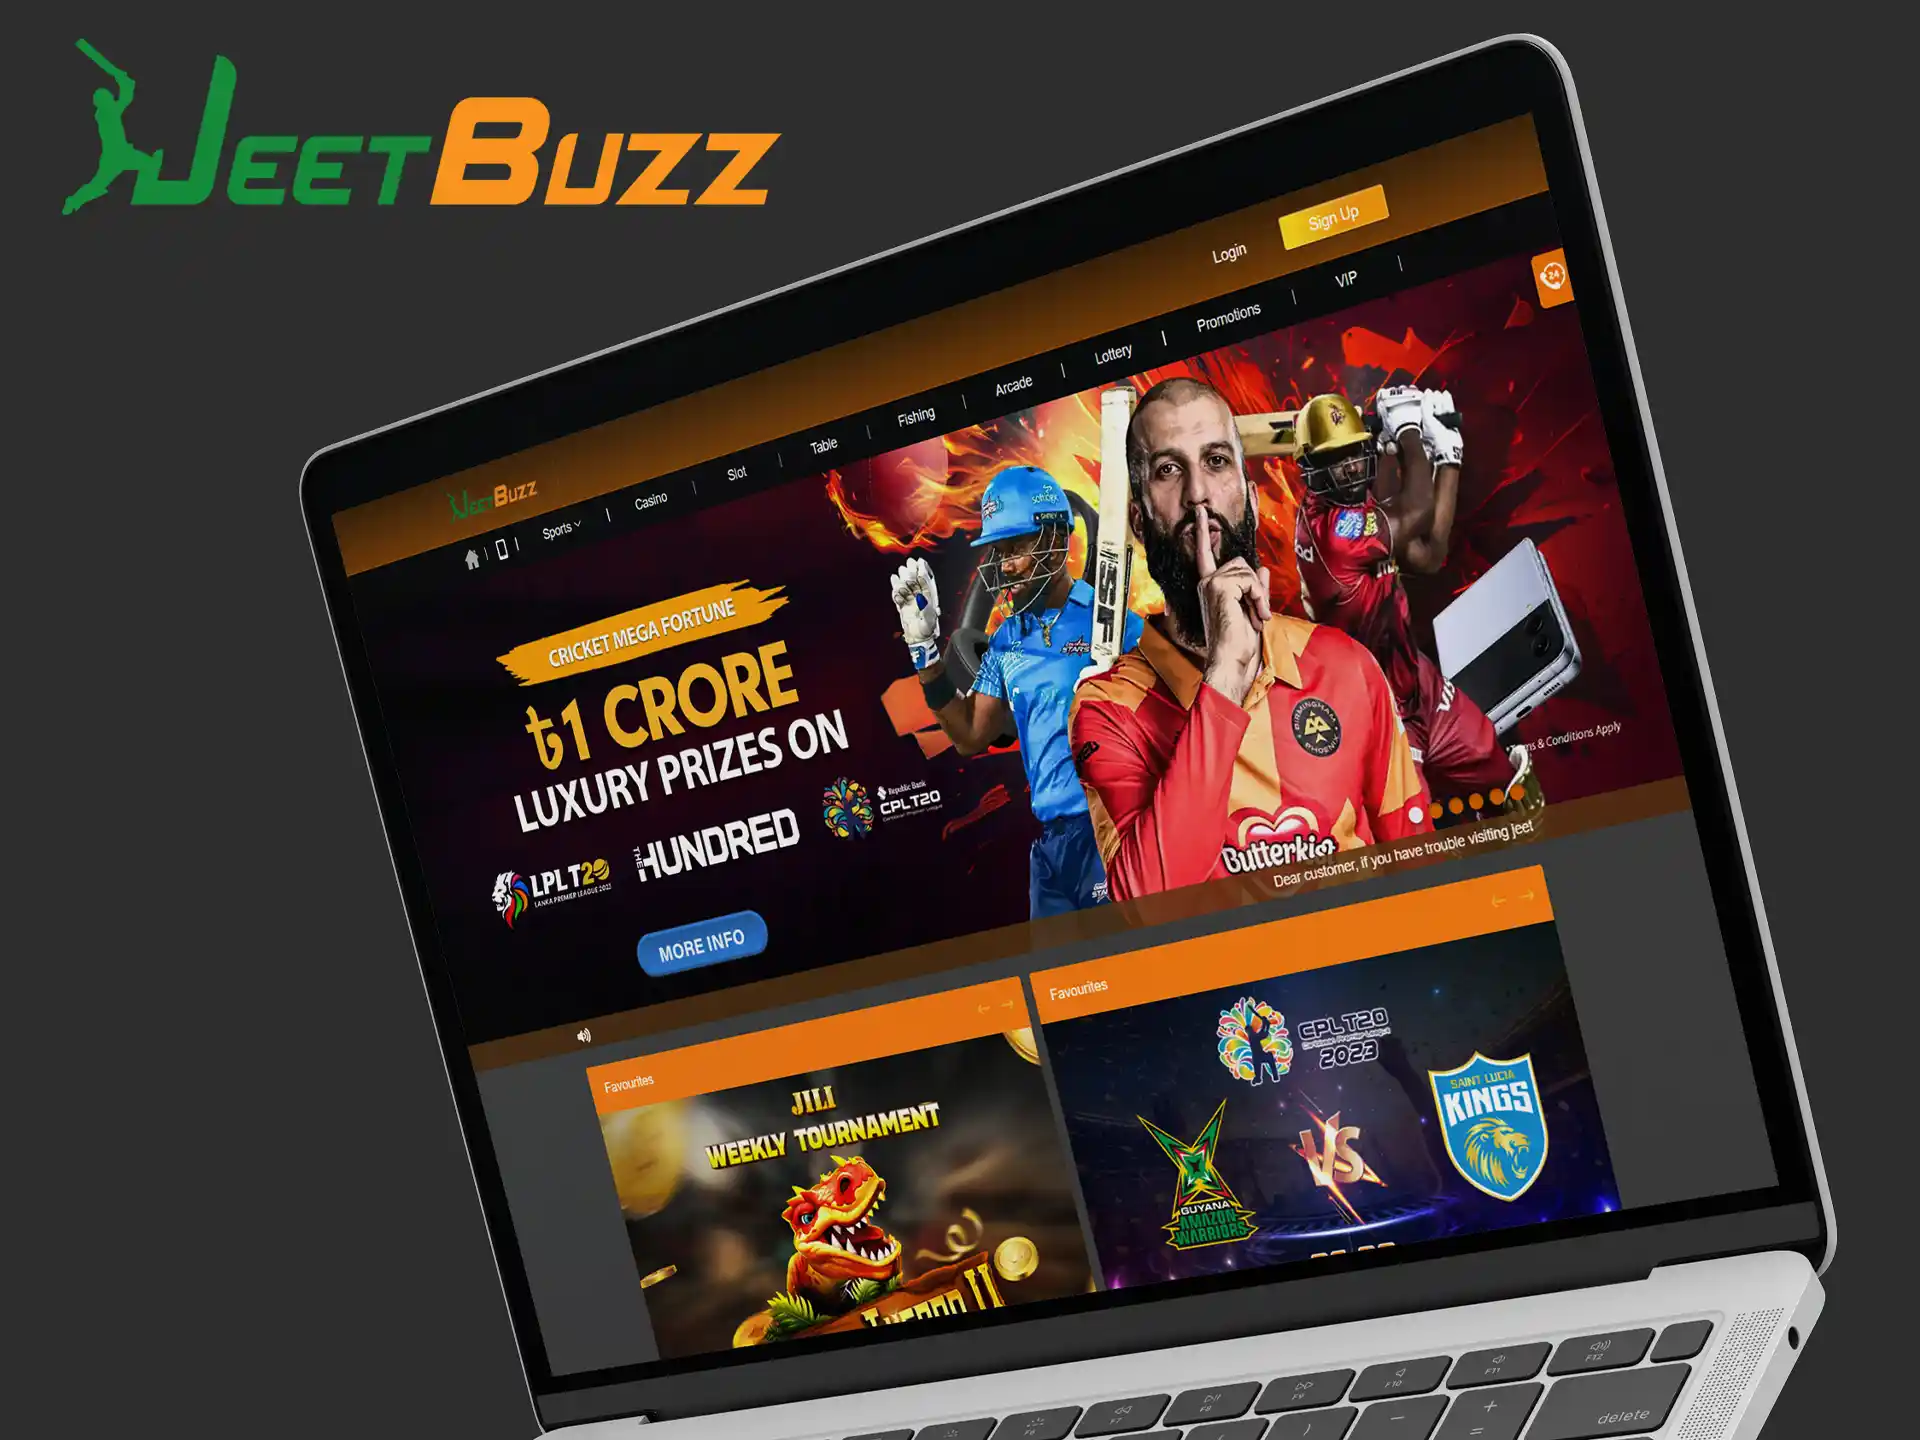 Jeetbuzz has a great bonus system for bettors on many sports and a VIP program with many different benefits.